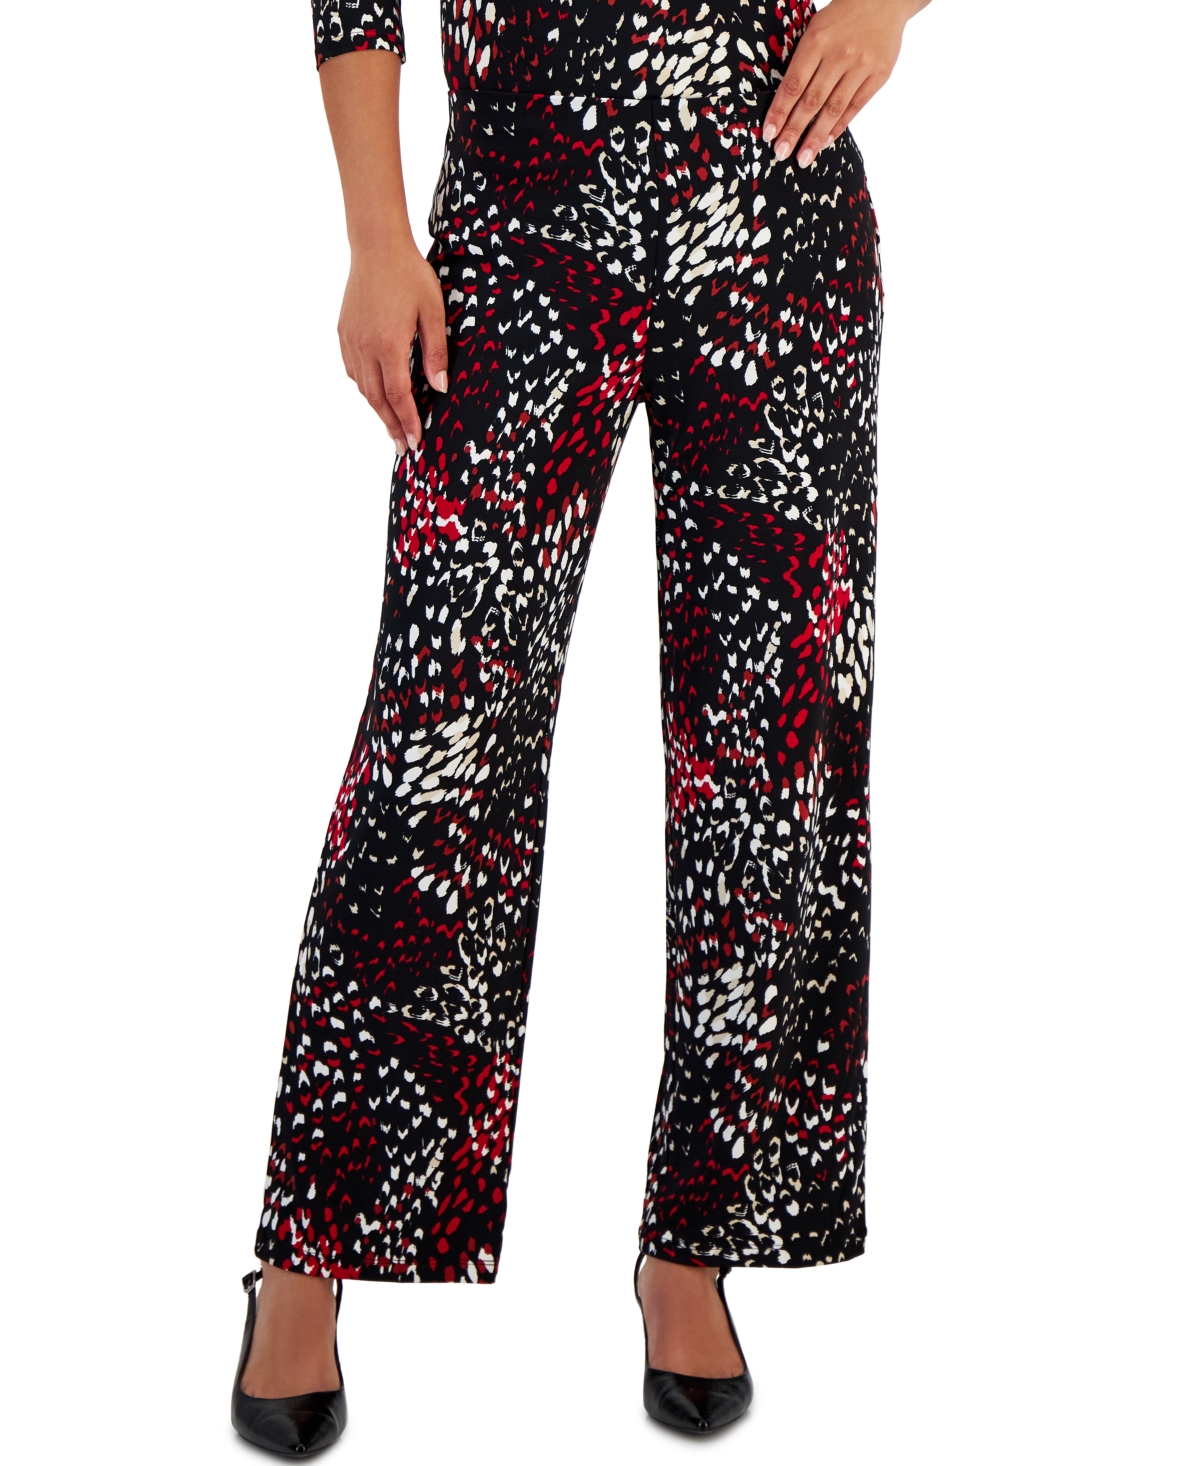 Women's Variation Spots Printed Pull-On Pants, Created for Macy's - Deep Black Combo